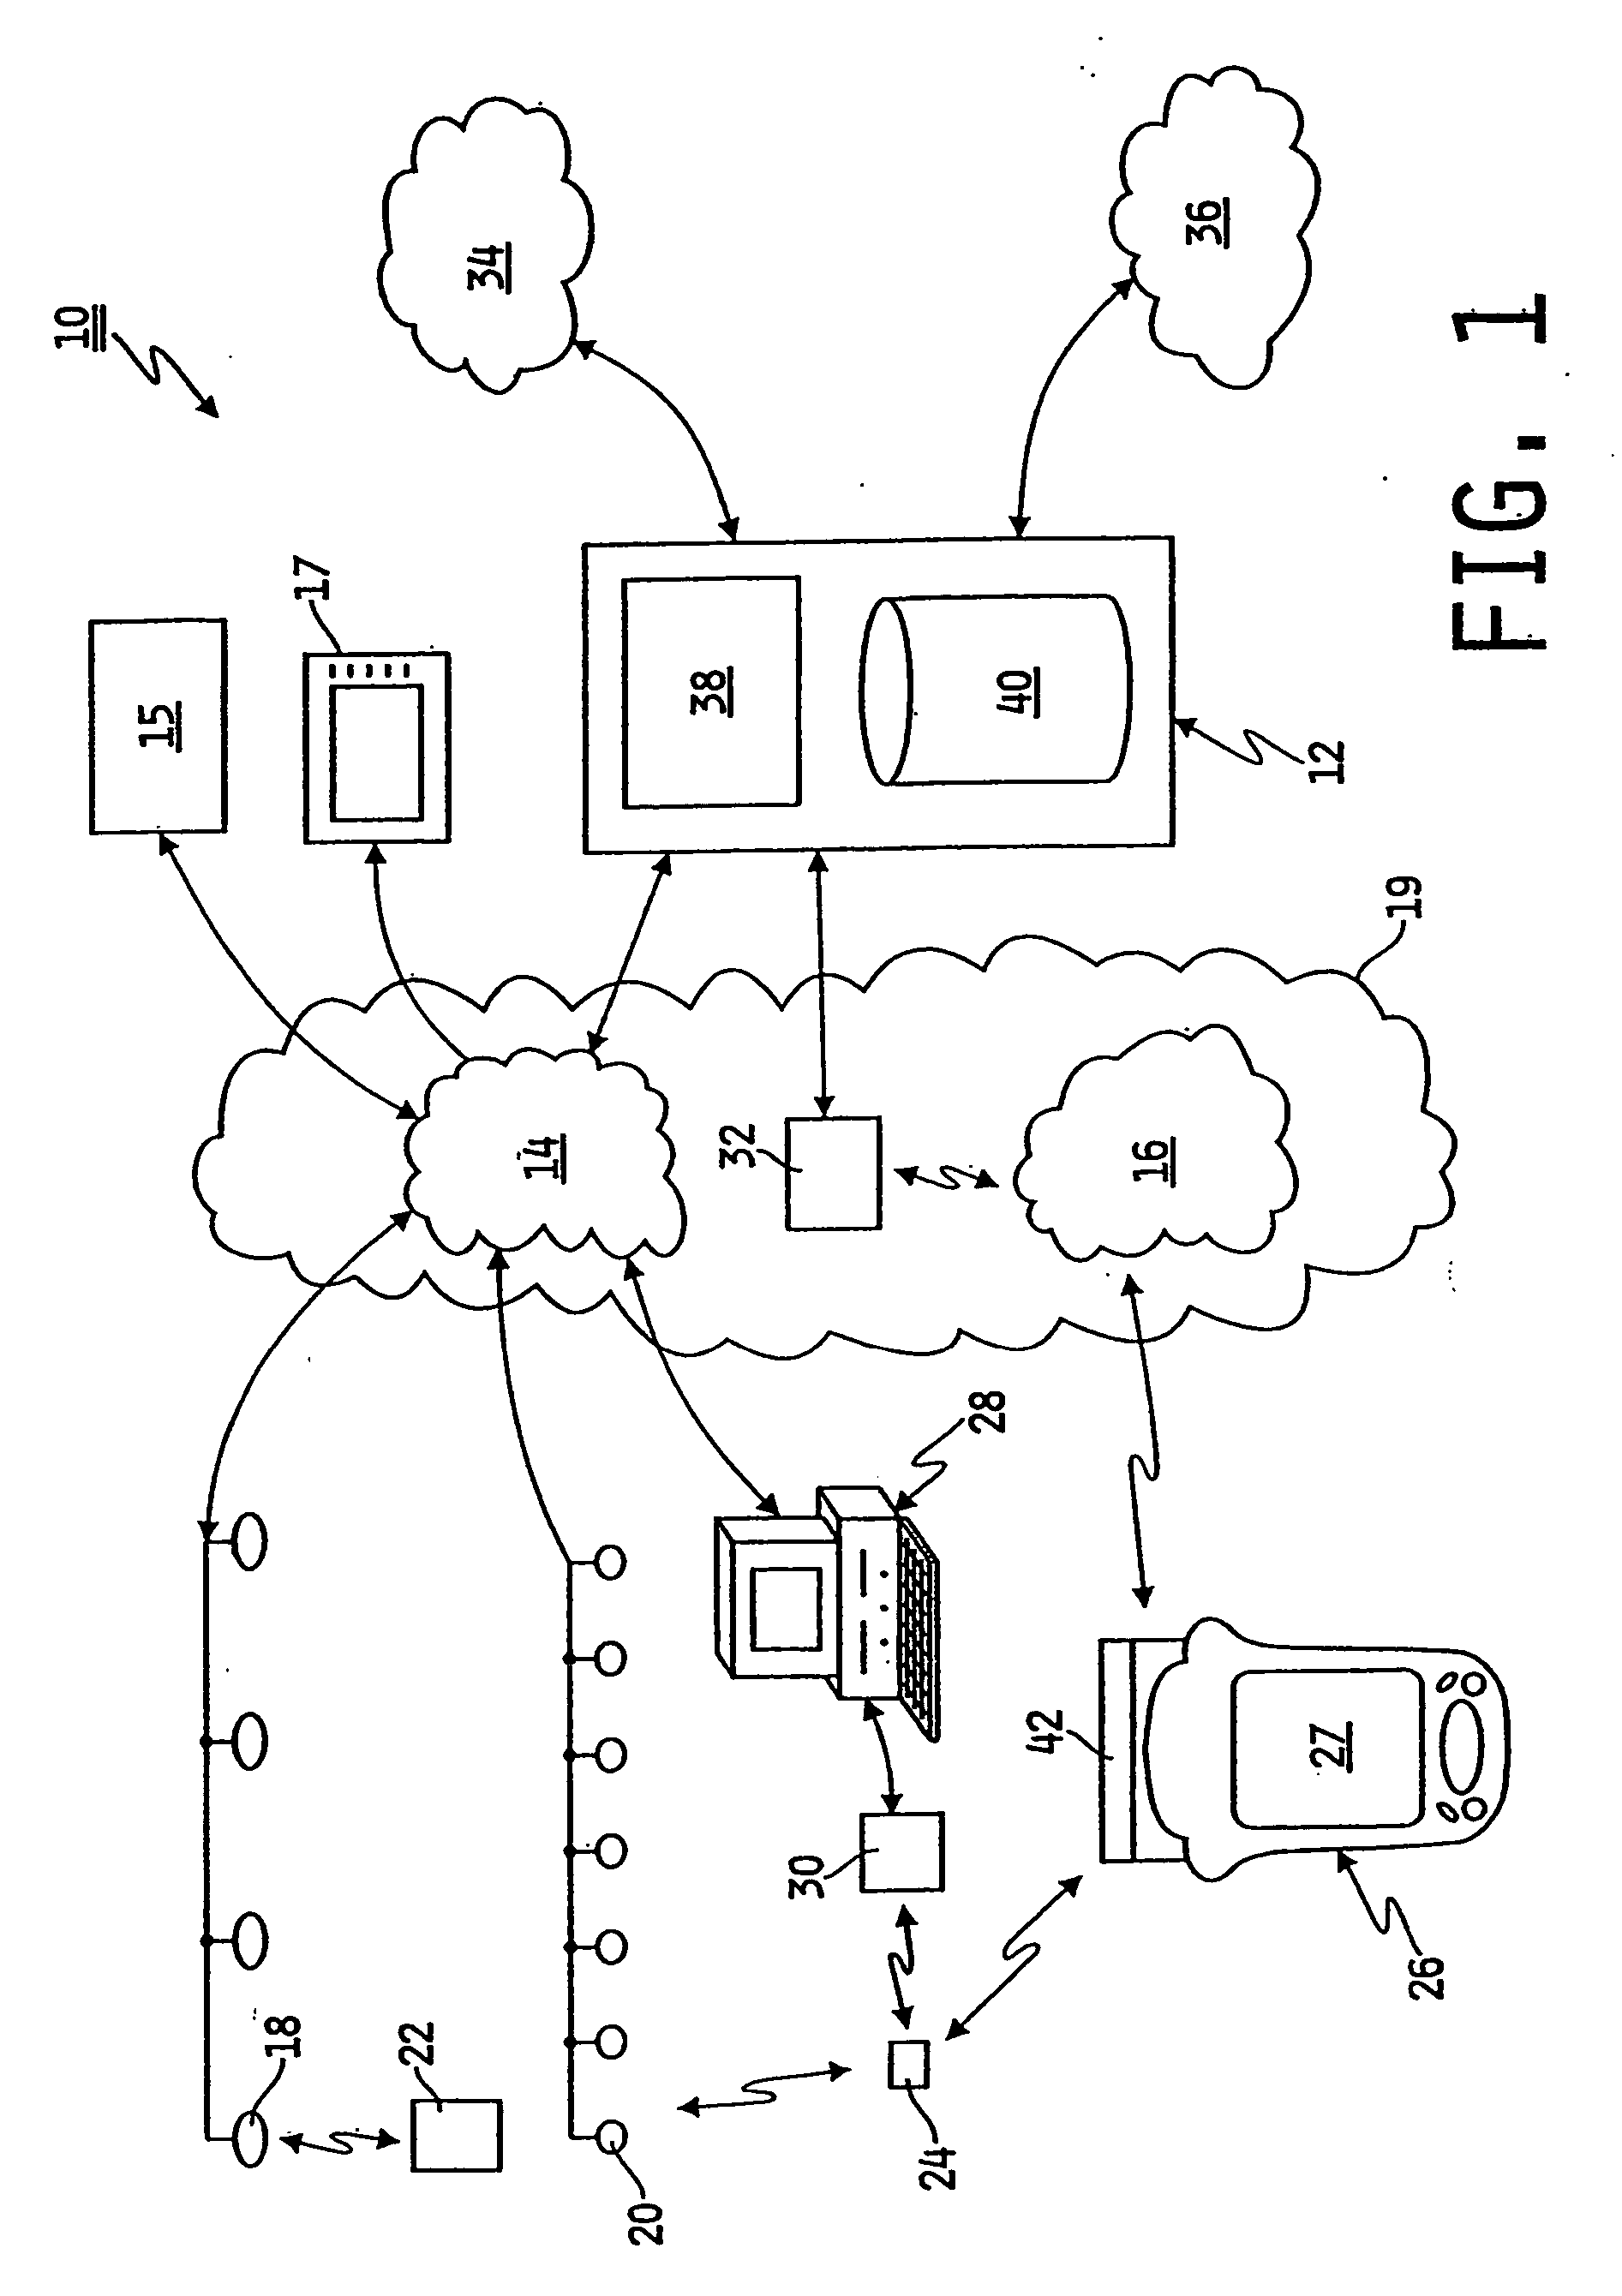 Universal communications, monitoring, tracking, and control system for a healthcare facility